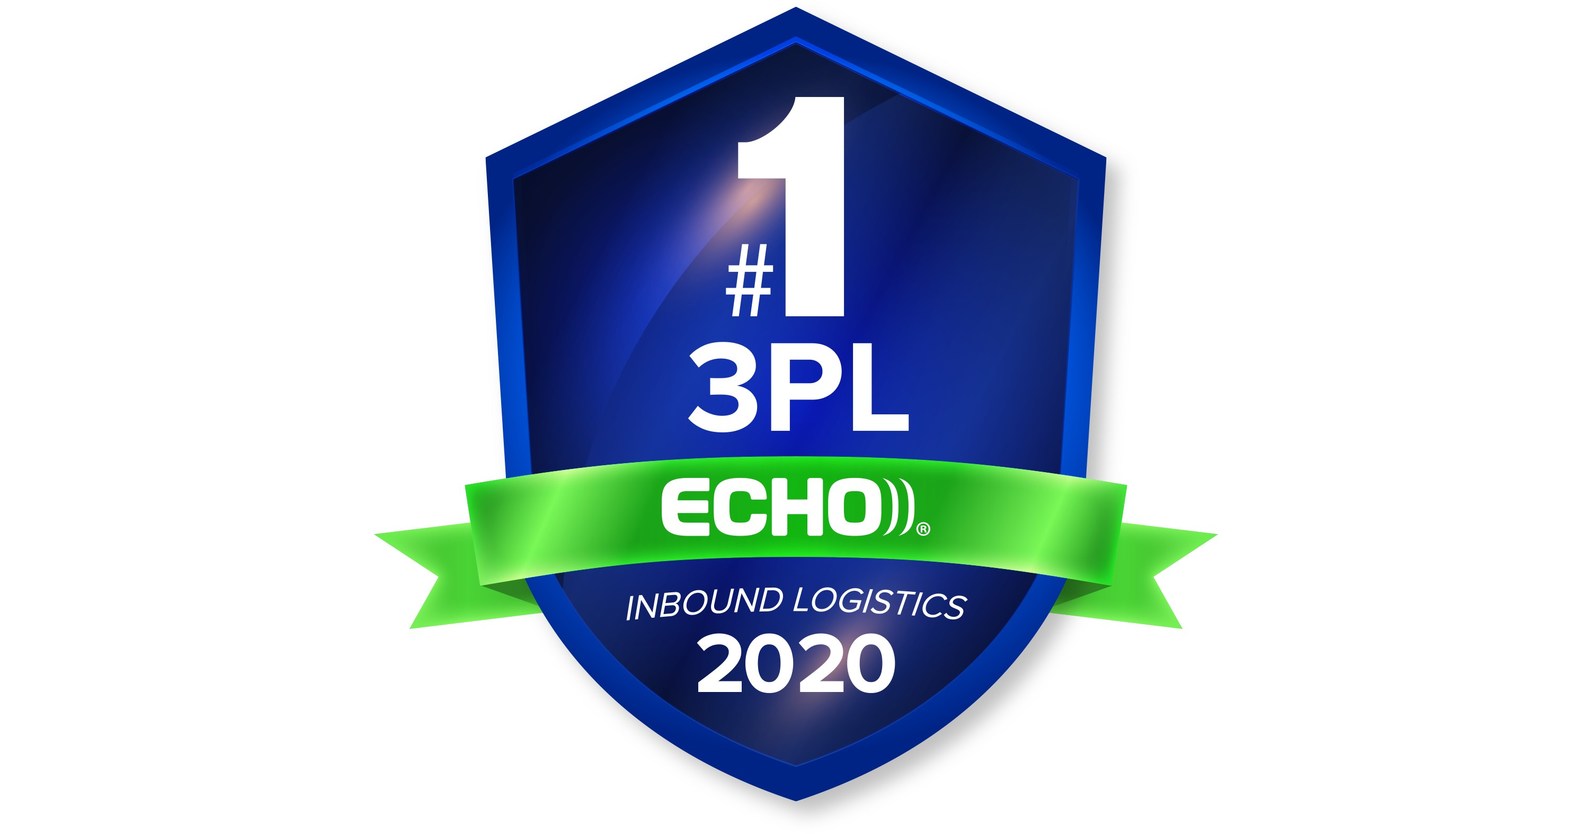 Echo Global Logistics Voted 1 Top 3pl For Fourth Year In A Row By Readers Of Inbound Logistics 4152